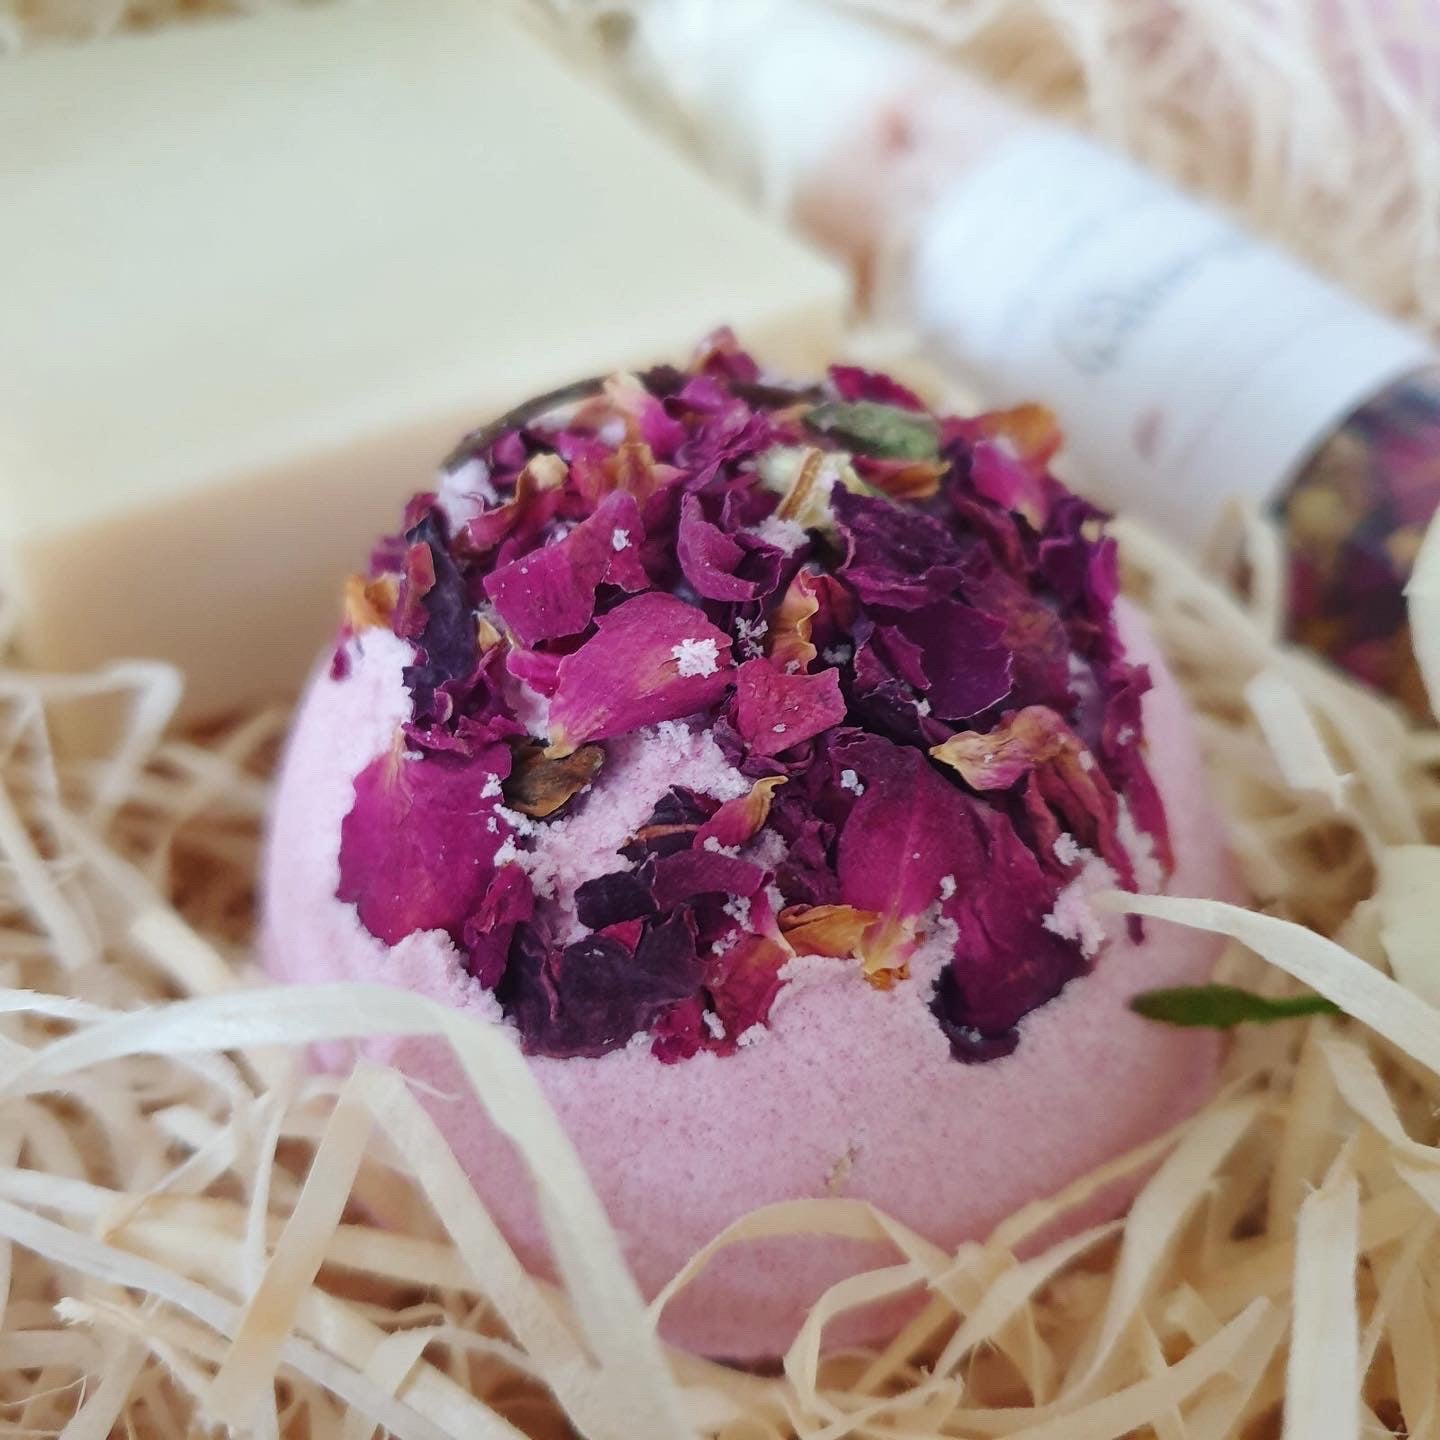 Anti-anxiety Secret Bath Bomb is laying on a wooden filing. This all natural bath bomb holds a positive hidden message inside and handmade by The Eden Collections.